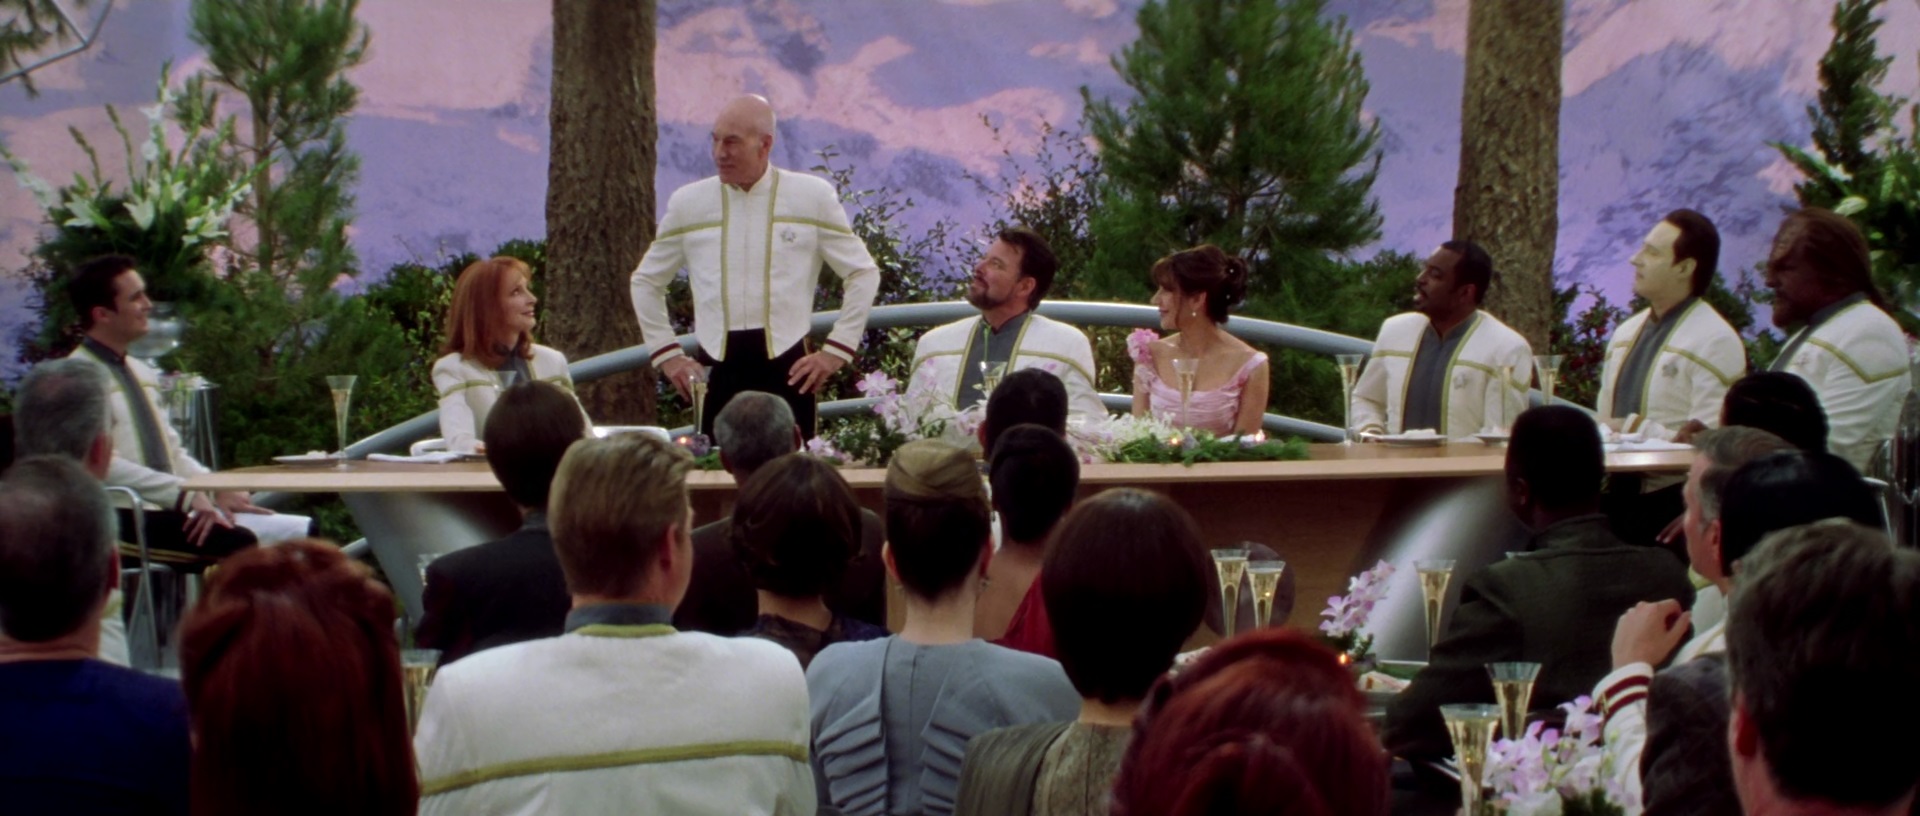 Riker and Troi's wedding